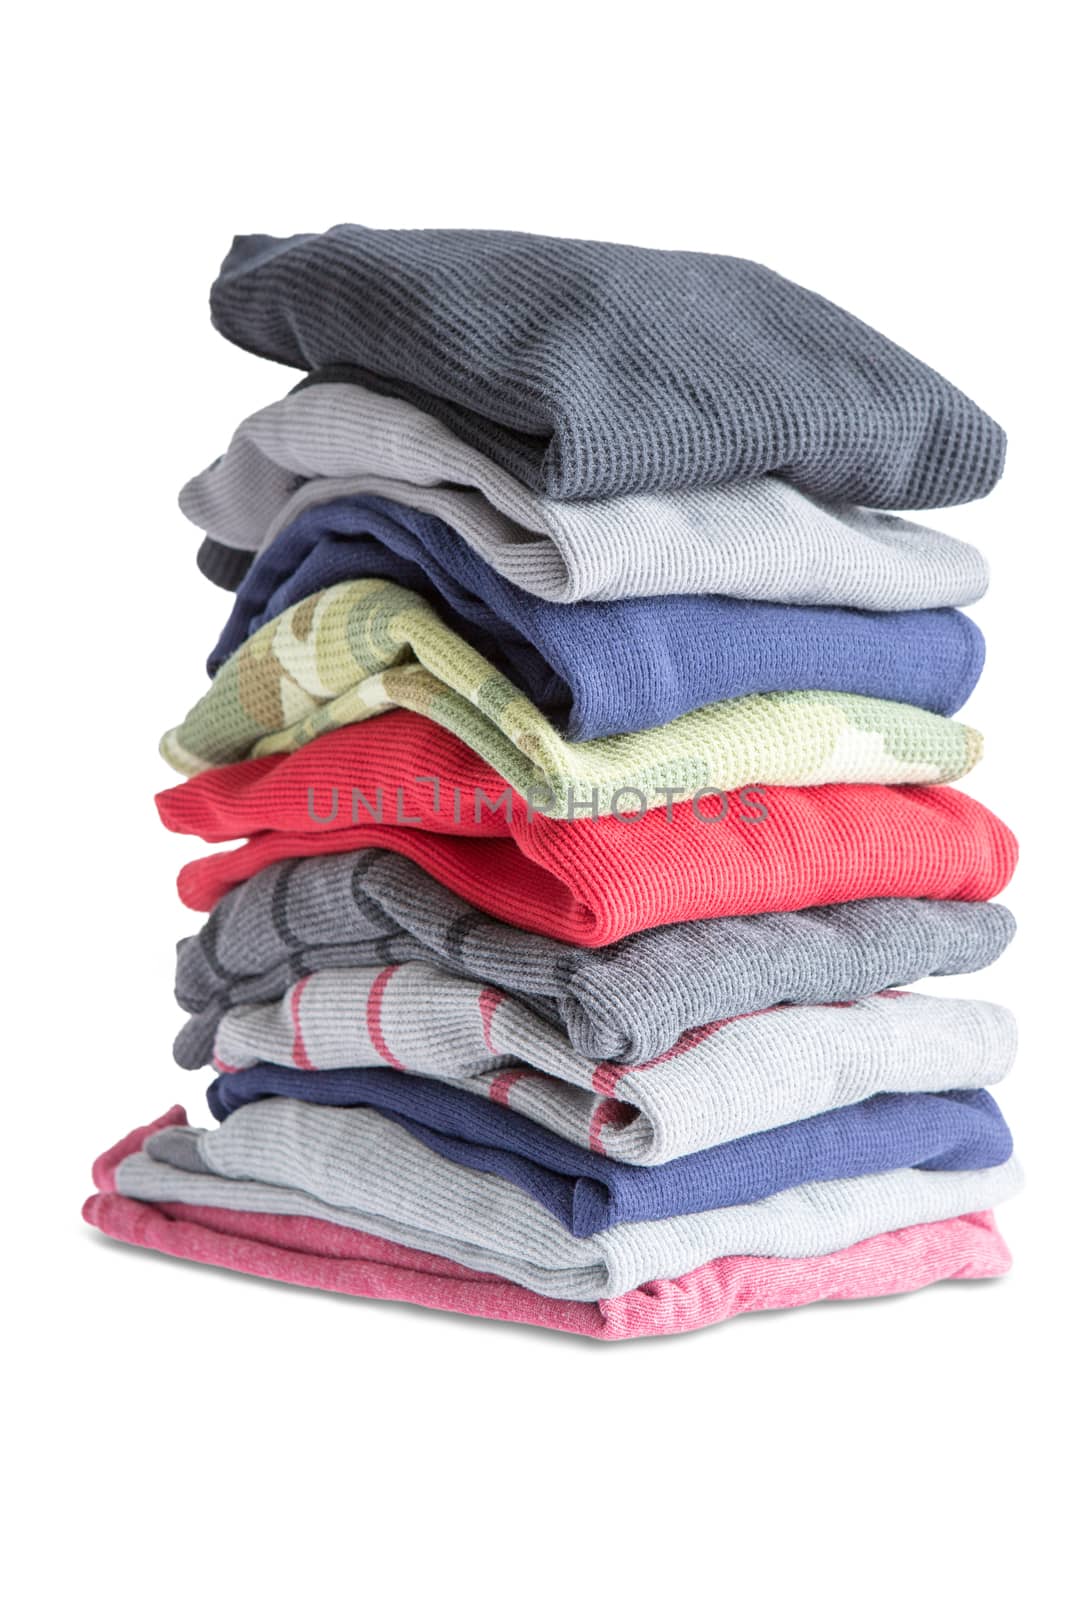 Folded Clean Clothes in a Pile on White Background by coskun